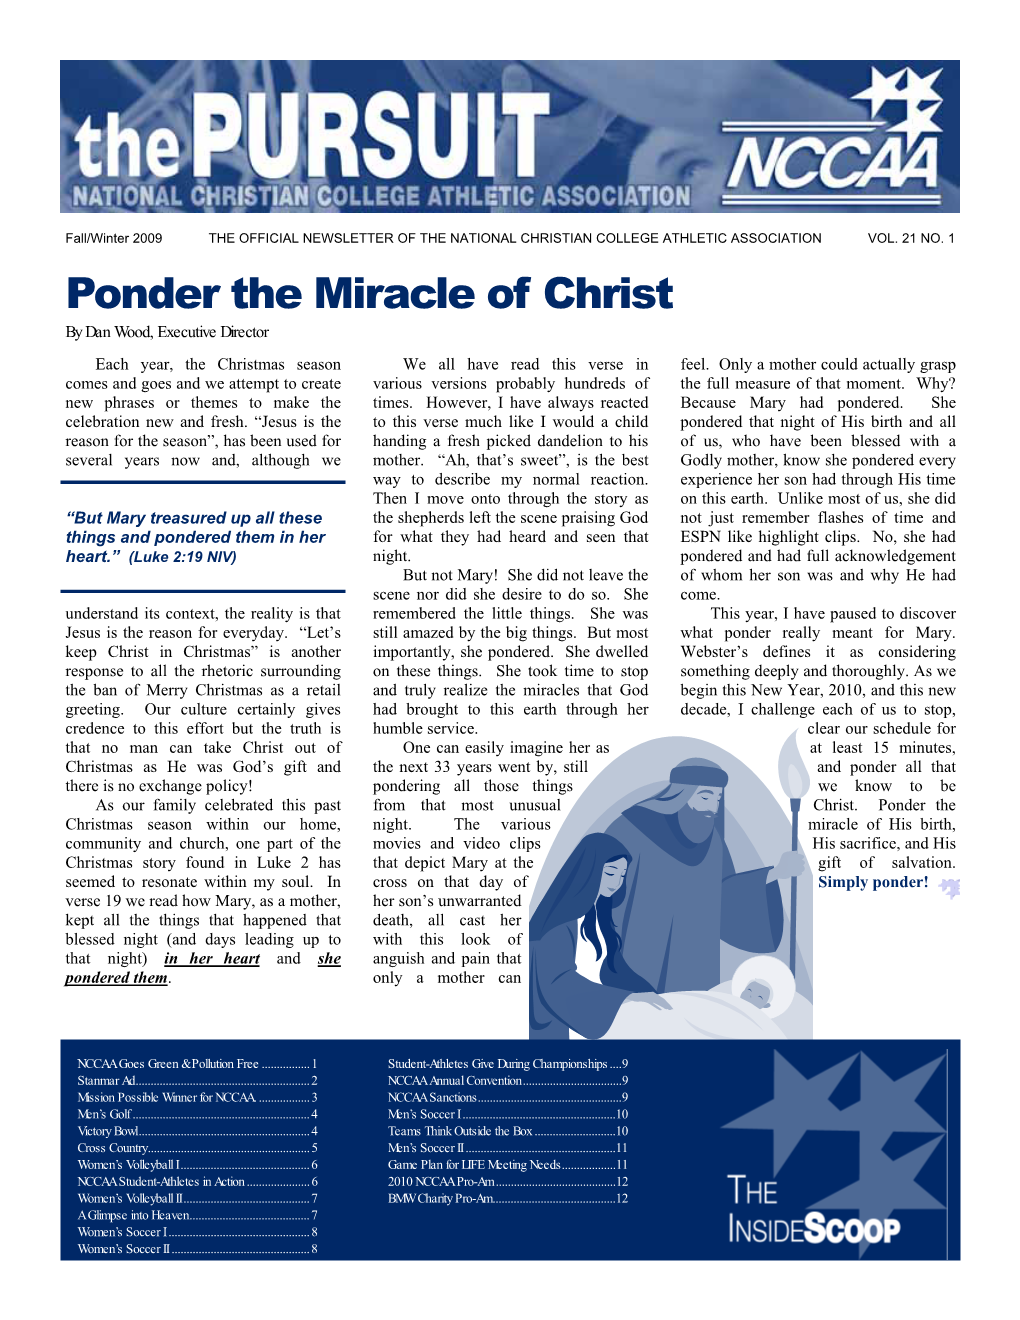 Fall/Winter 2009 the OFFICIAL NEWSLETTER of the NATIONAL CHRISTIAN COLLEGE ATHLETIC ASSOCIATION VOL